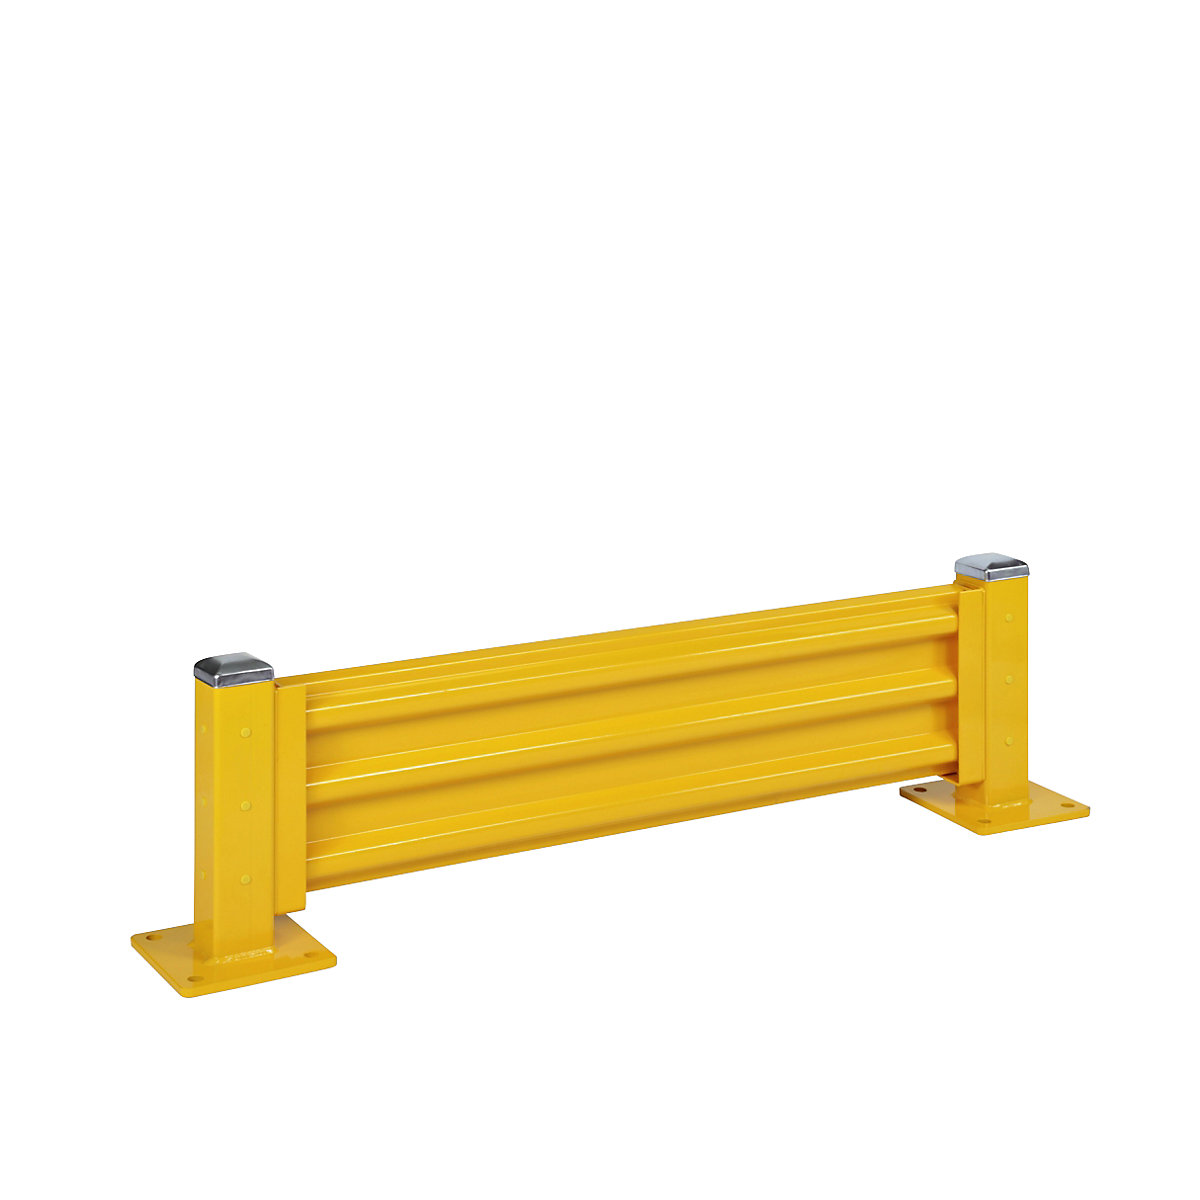 Crash protection wall, height 480 mm, 1 wall section, length 1372 mm, standard section incl. 2 posts-4